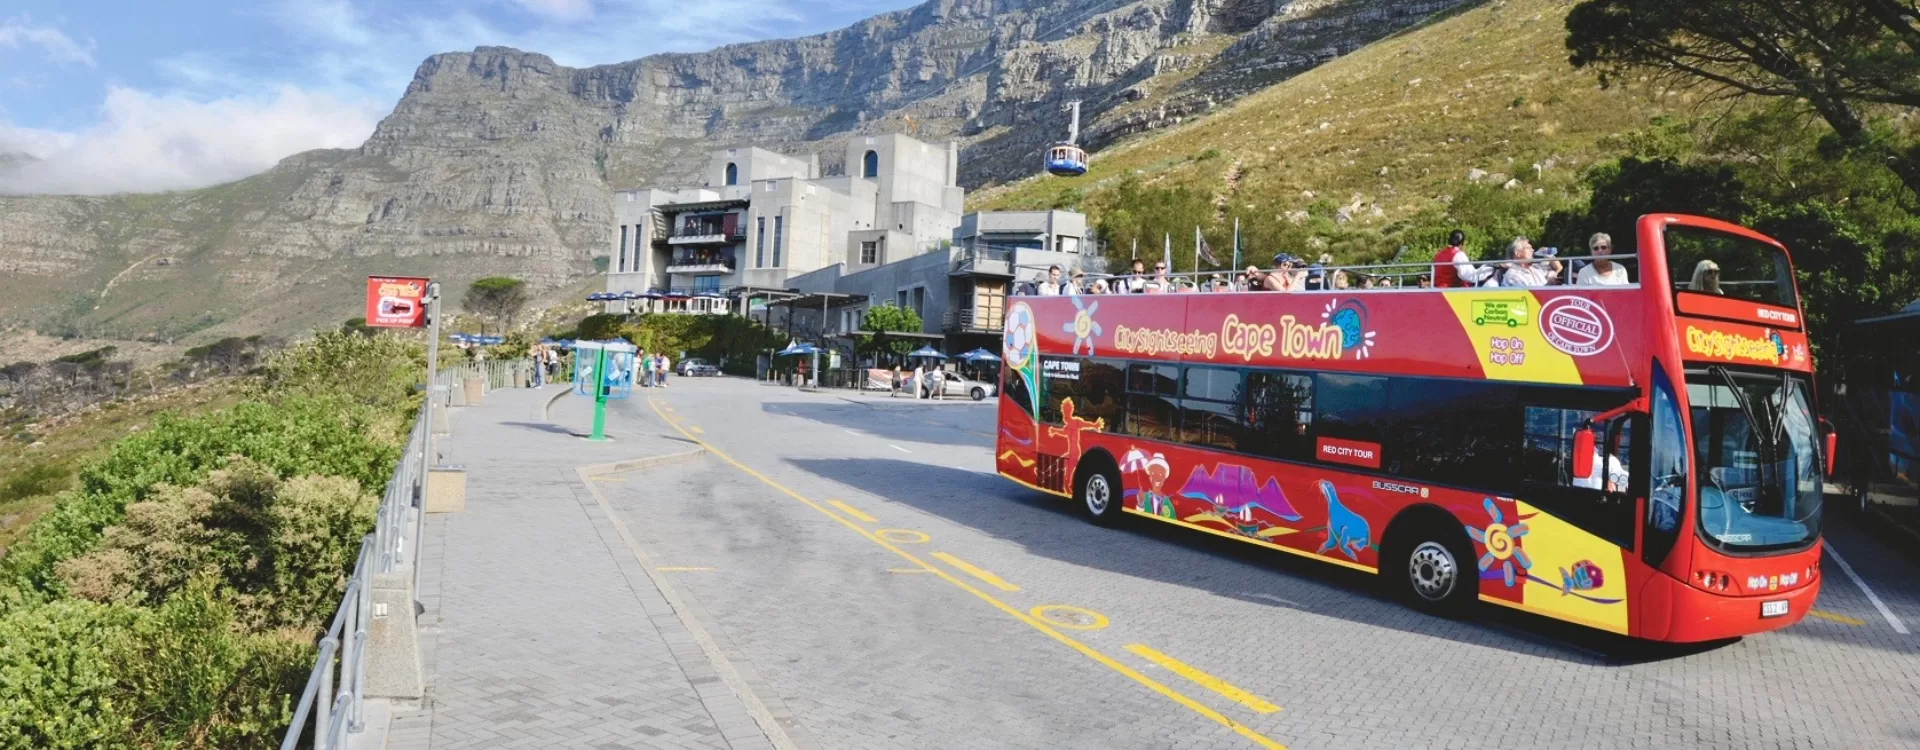 How to Get Around in Cape Town